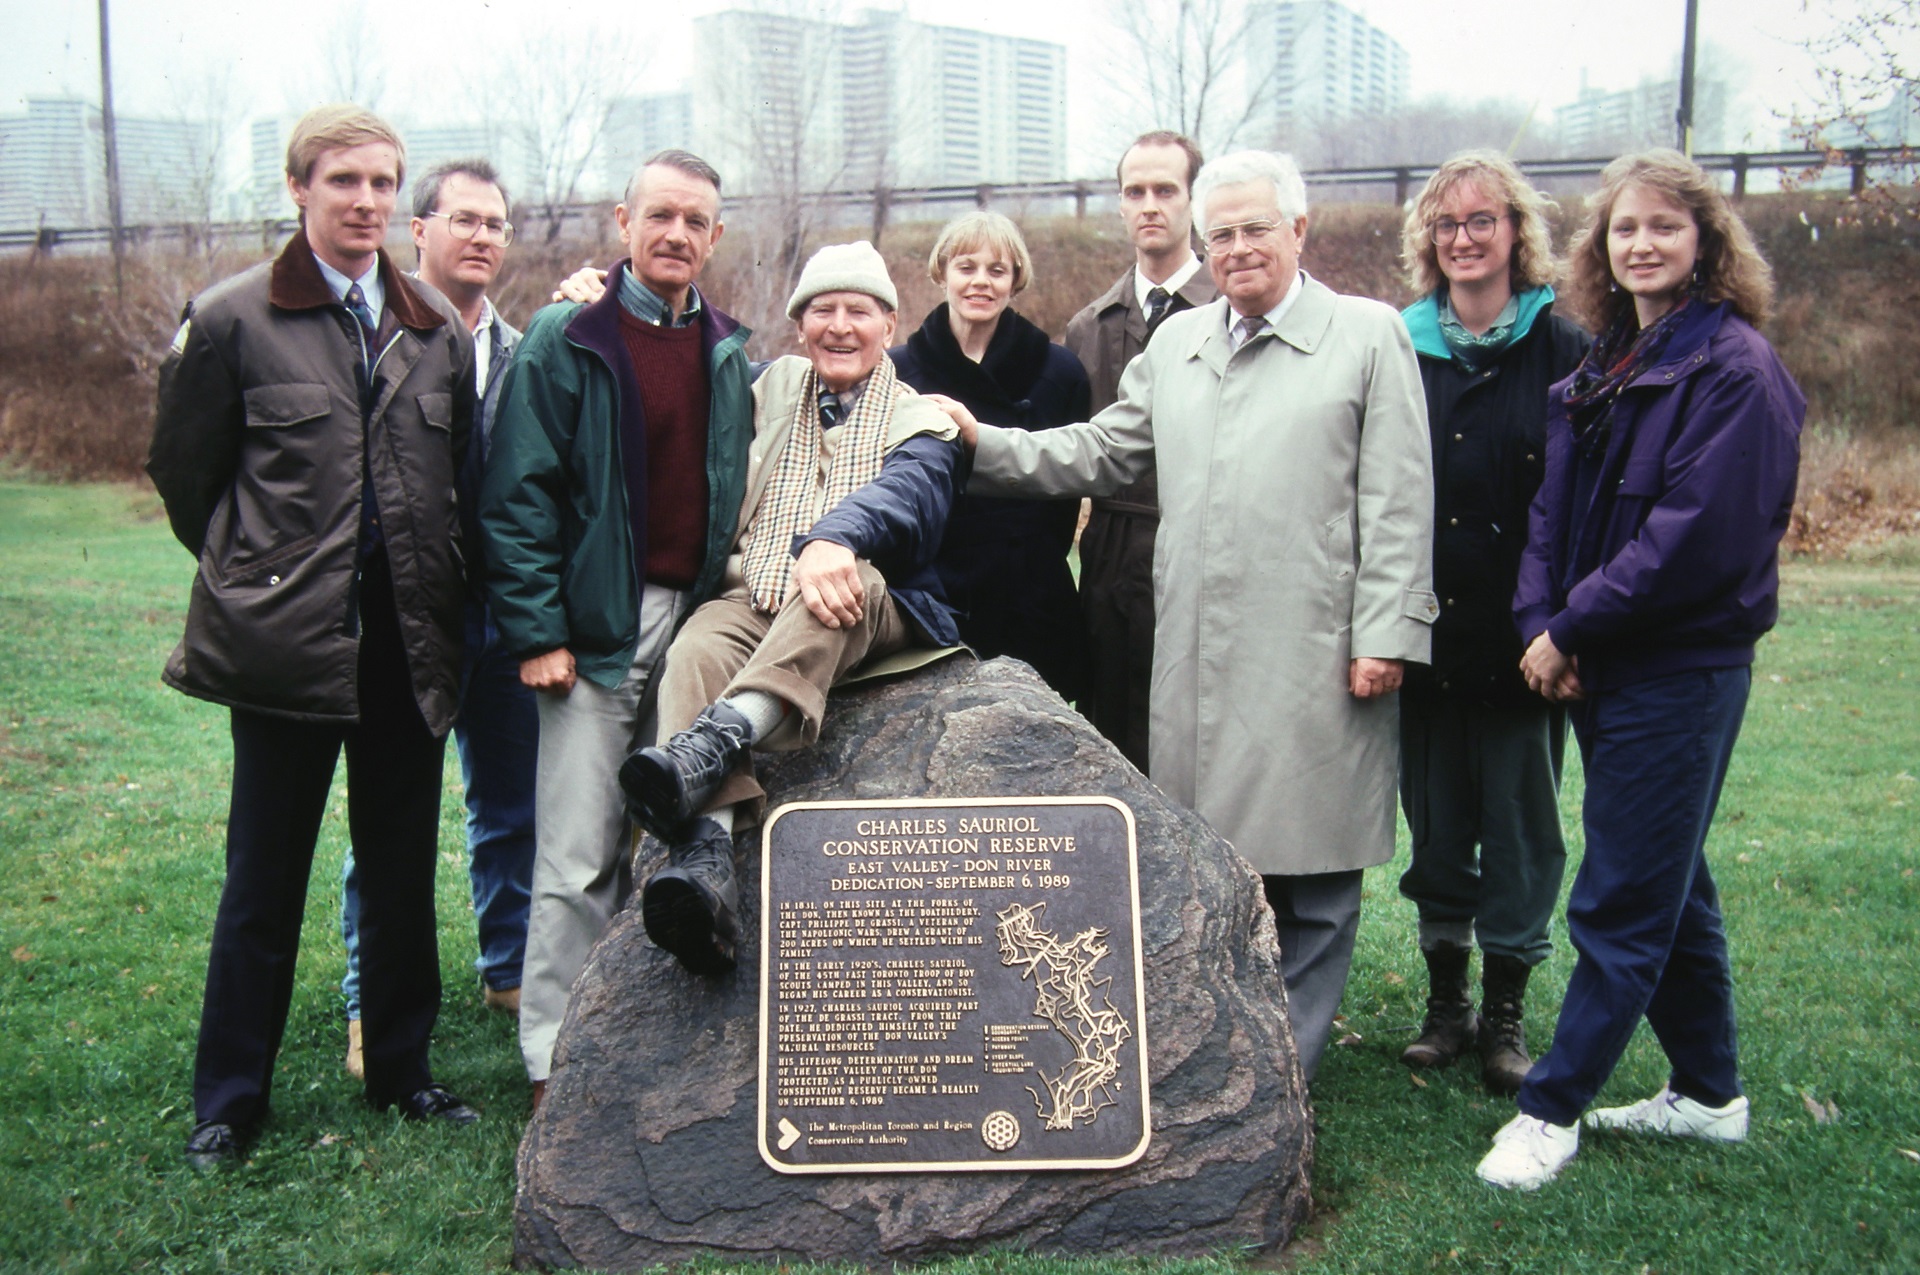 Charles Sauriol poses with the plaque bearing his name at the Charles Sauriol Conservation Reserve in 1989